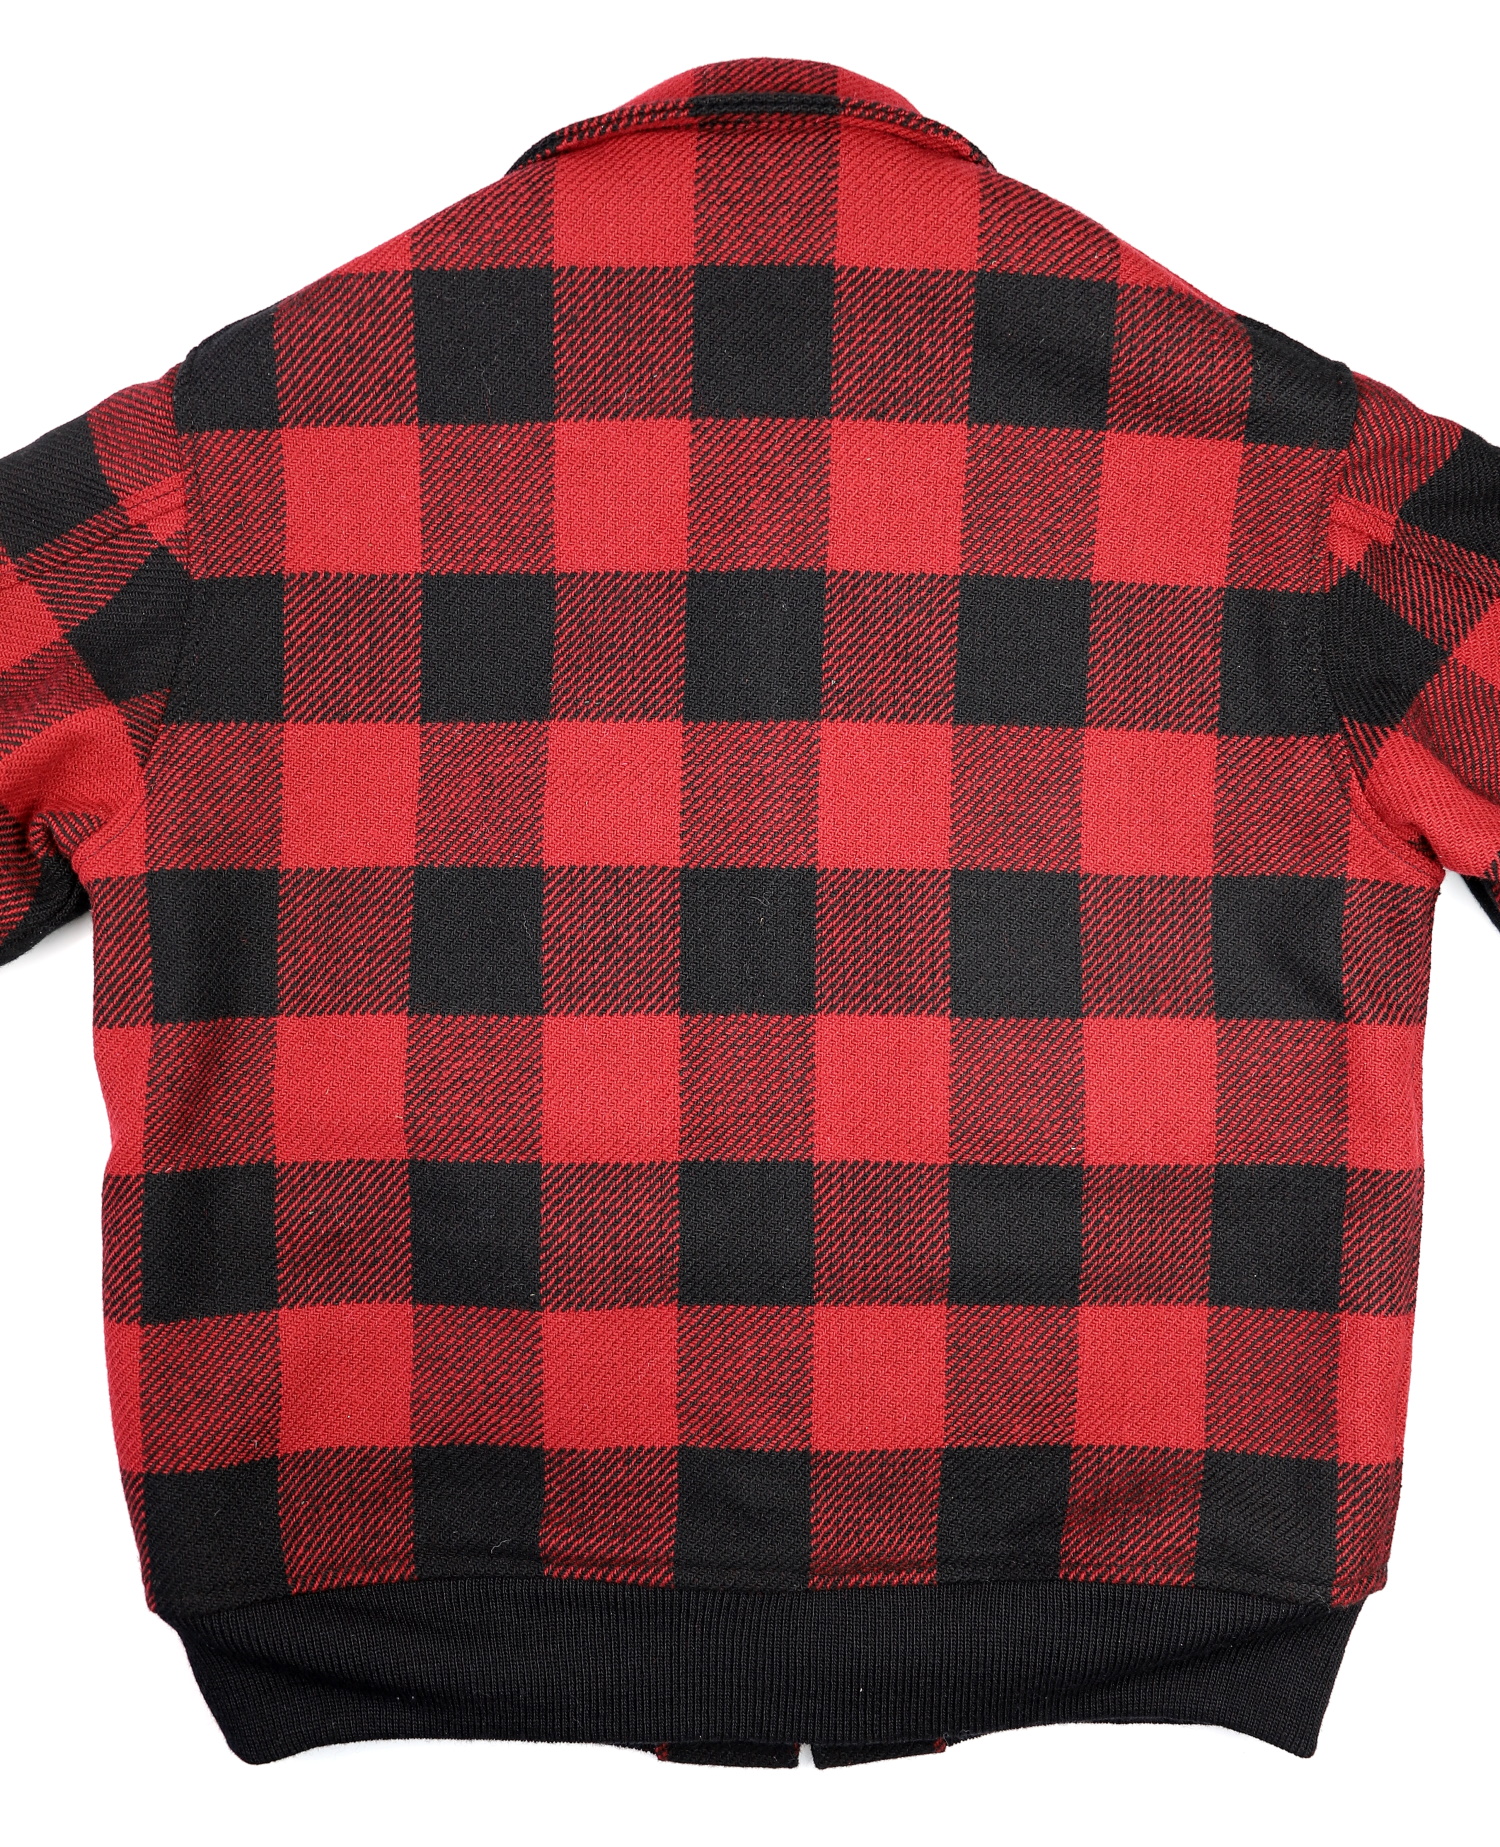 Aero Waterfront Red and Black Wool JE9 back.jpg